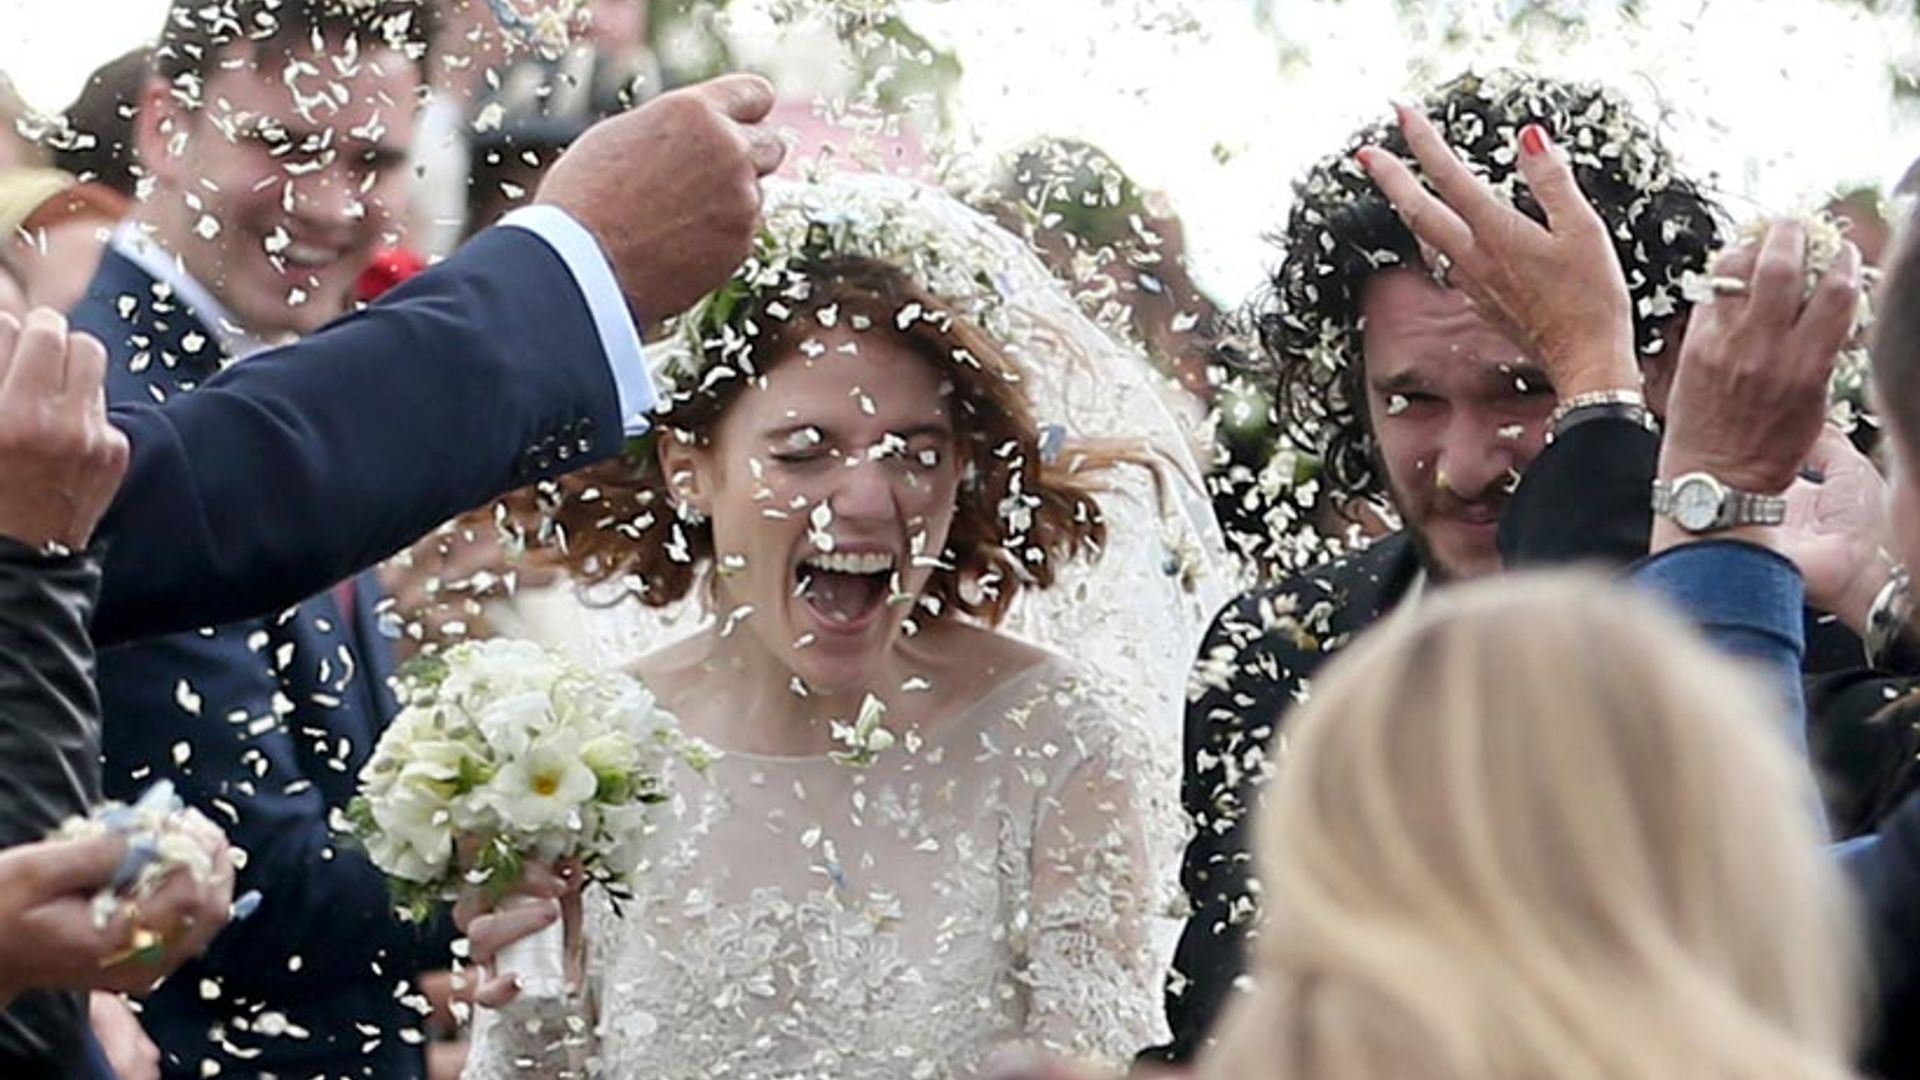 Game of Thrones star Kit Harington marries Rose Leslie: all the pictures